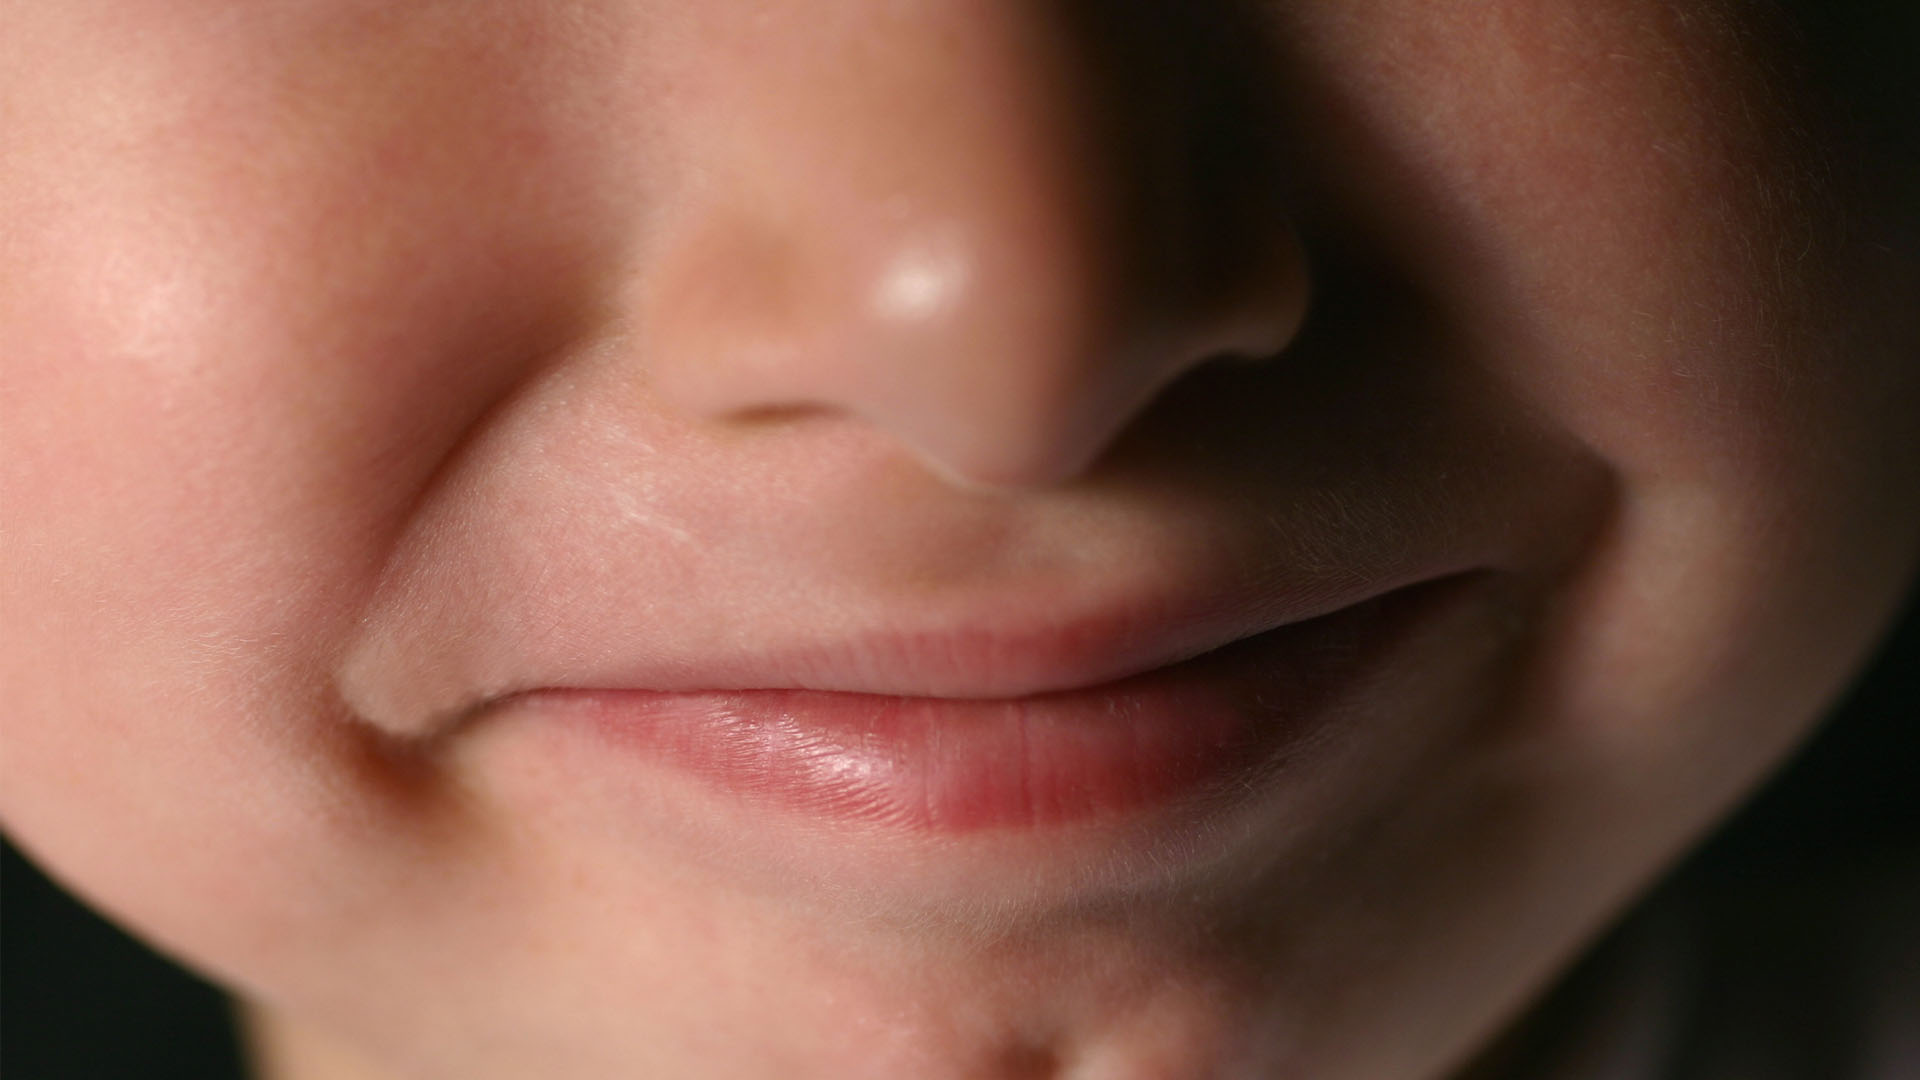 Image depicts a close up of a young boy's face with a cleft chin or chin dimple